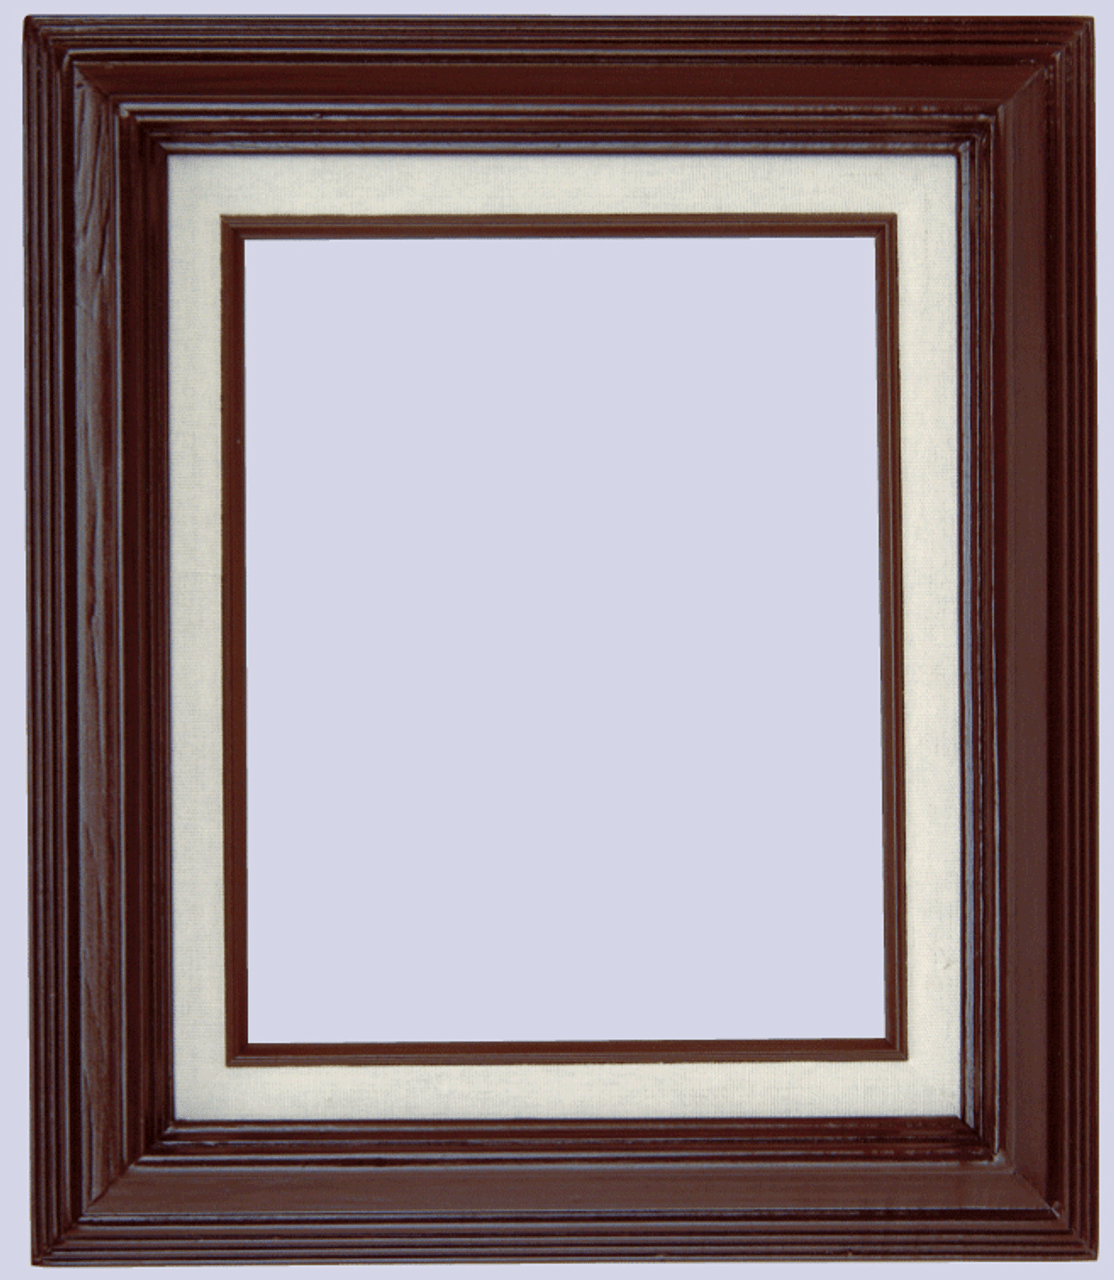 3 Inch Econo Wood Frames With Linen Liners: 20X27